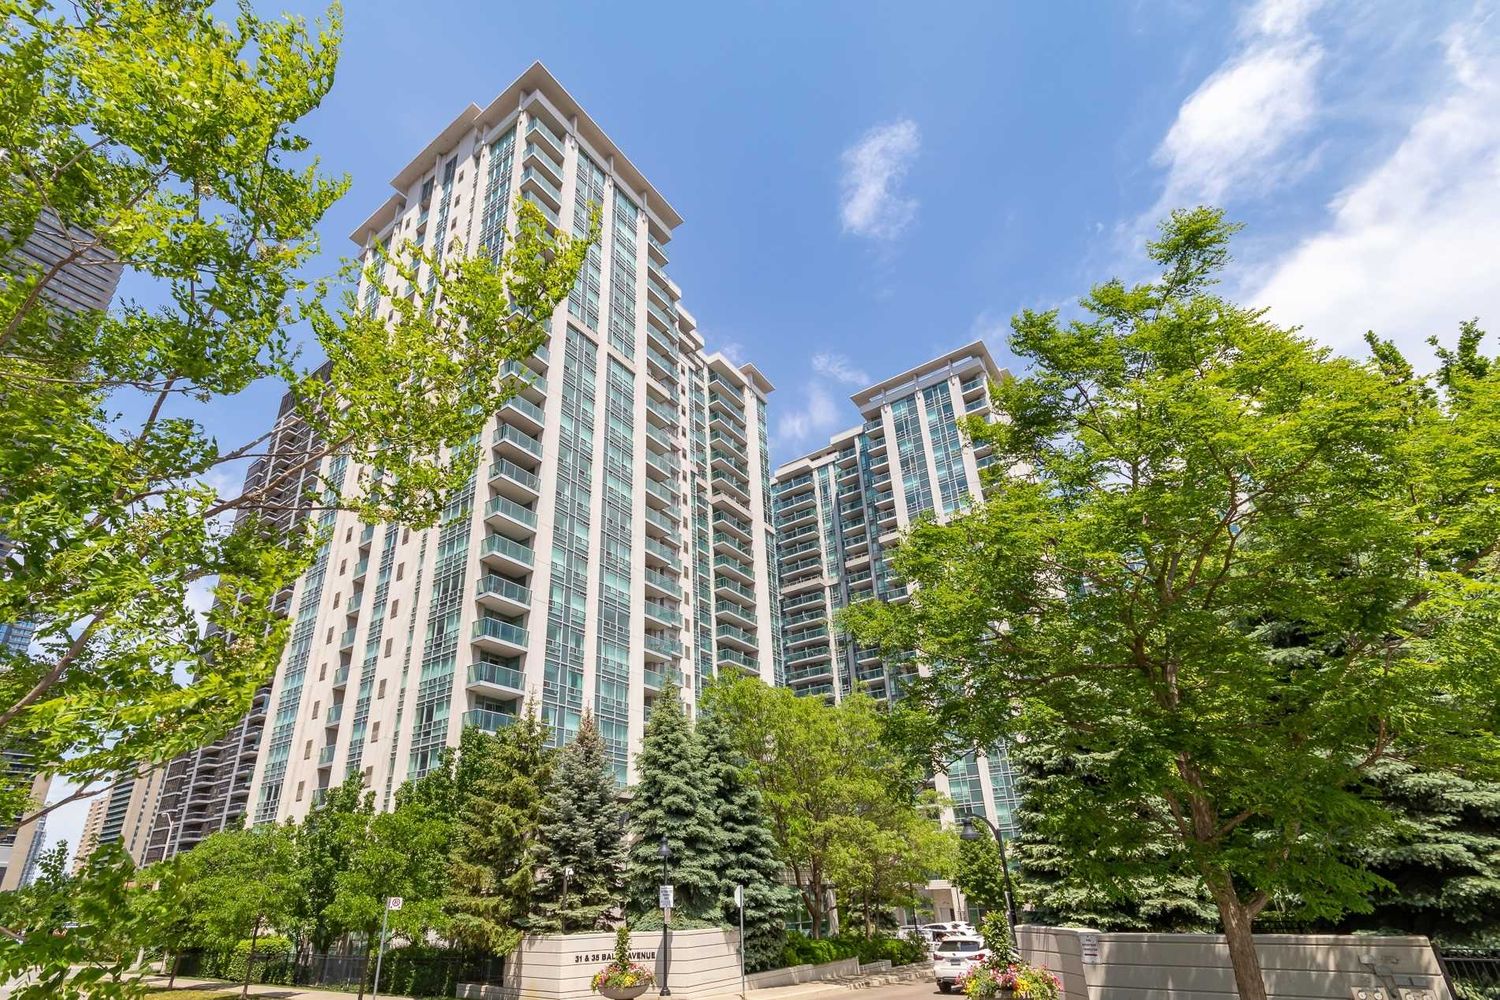 35 Bales Avenue. Cosmo Residences is located in  North York, Toronto - image #3 of 3